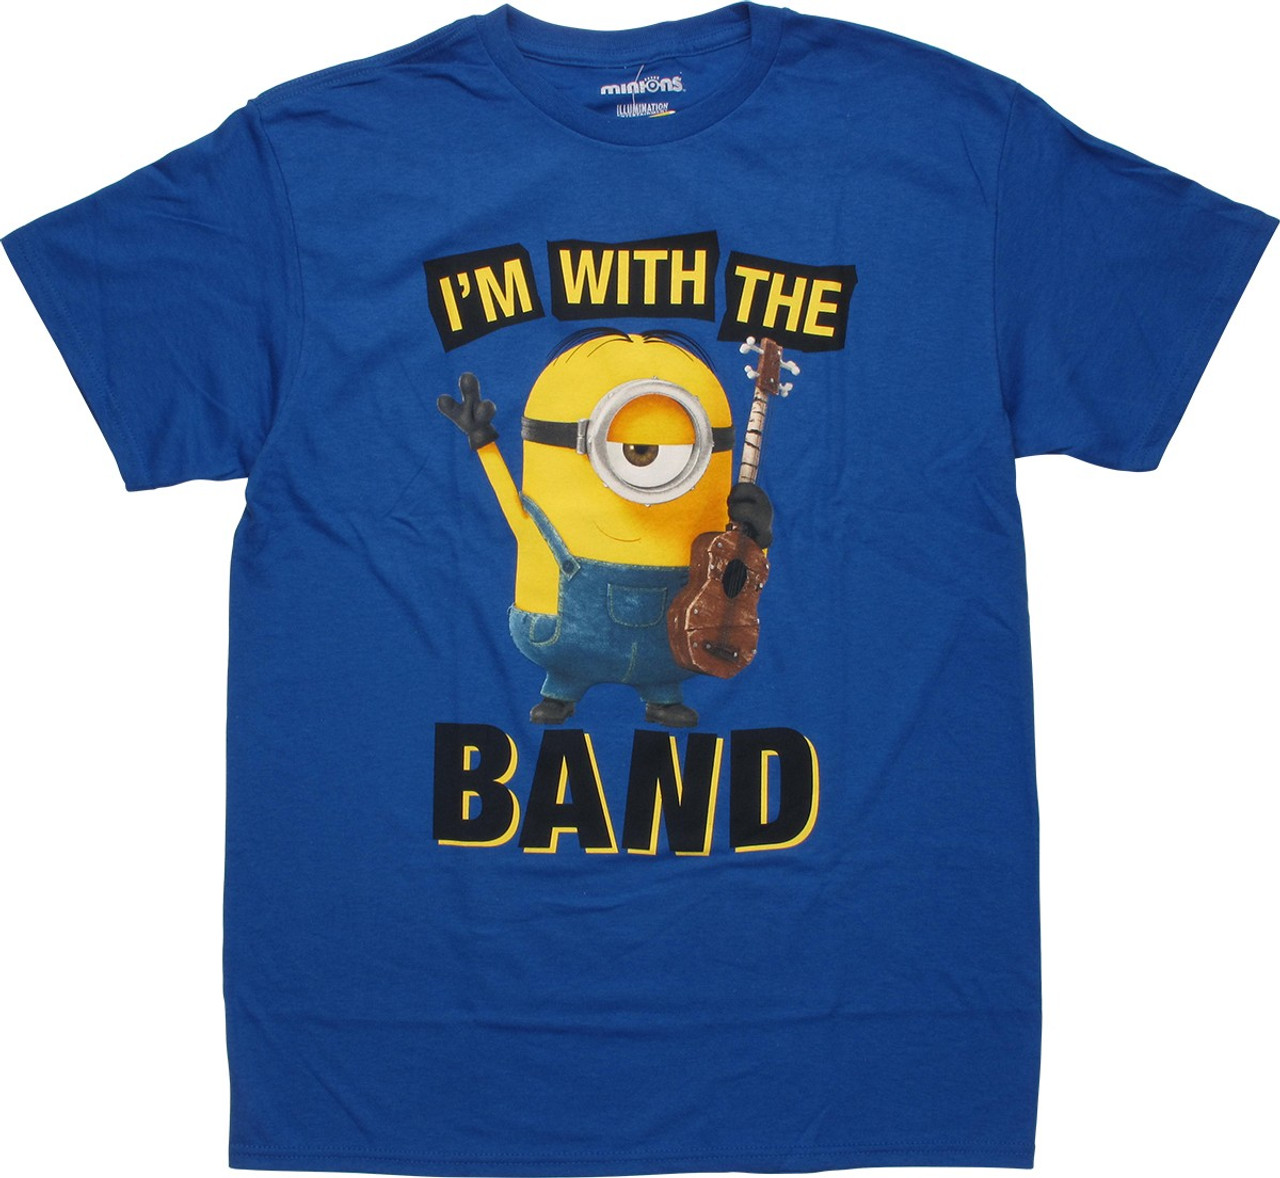 https://cdn11.bigcommerce.com/s-kjvm95bh8i/images/stencil/1280x1280/products/64655/100443/despicable-me-minions-i-m-with-the-band-t-shirt-5__16286.1512271055.jpg?c=2